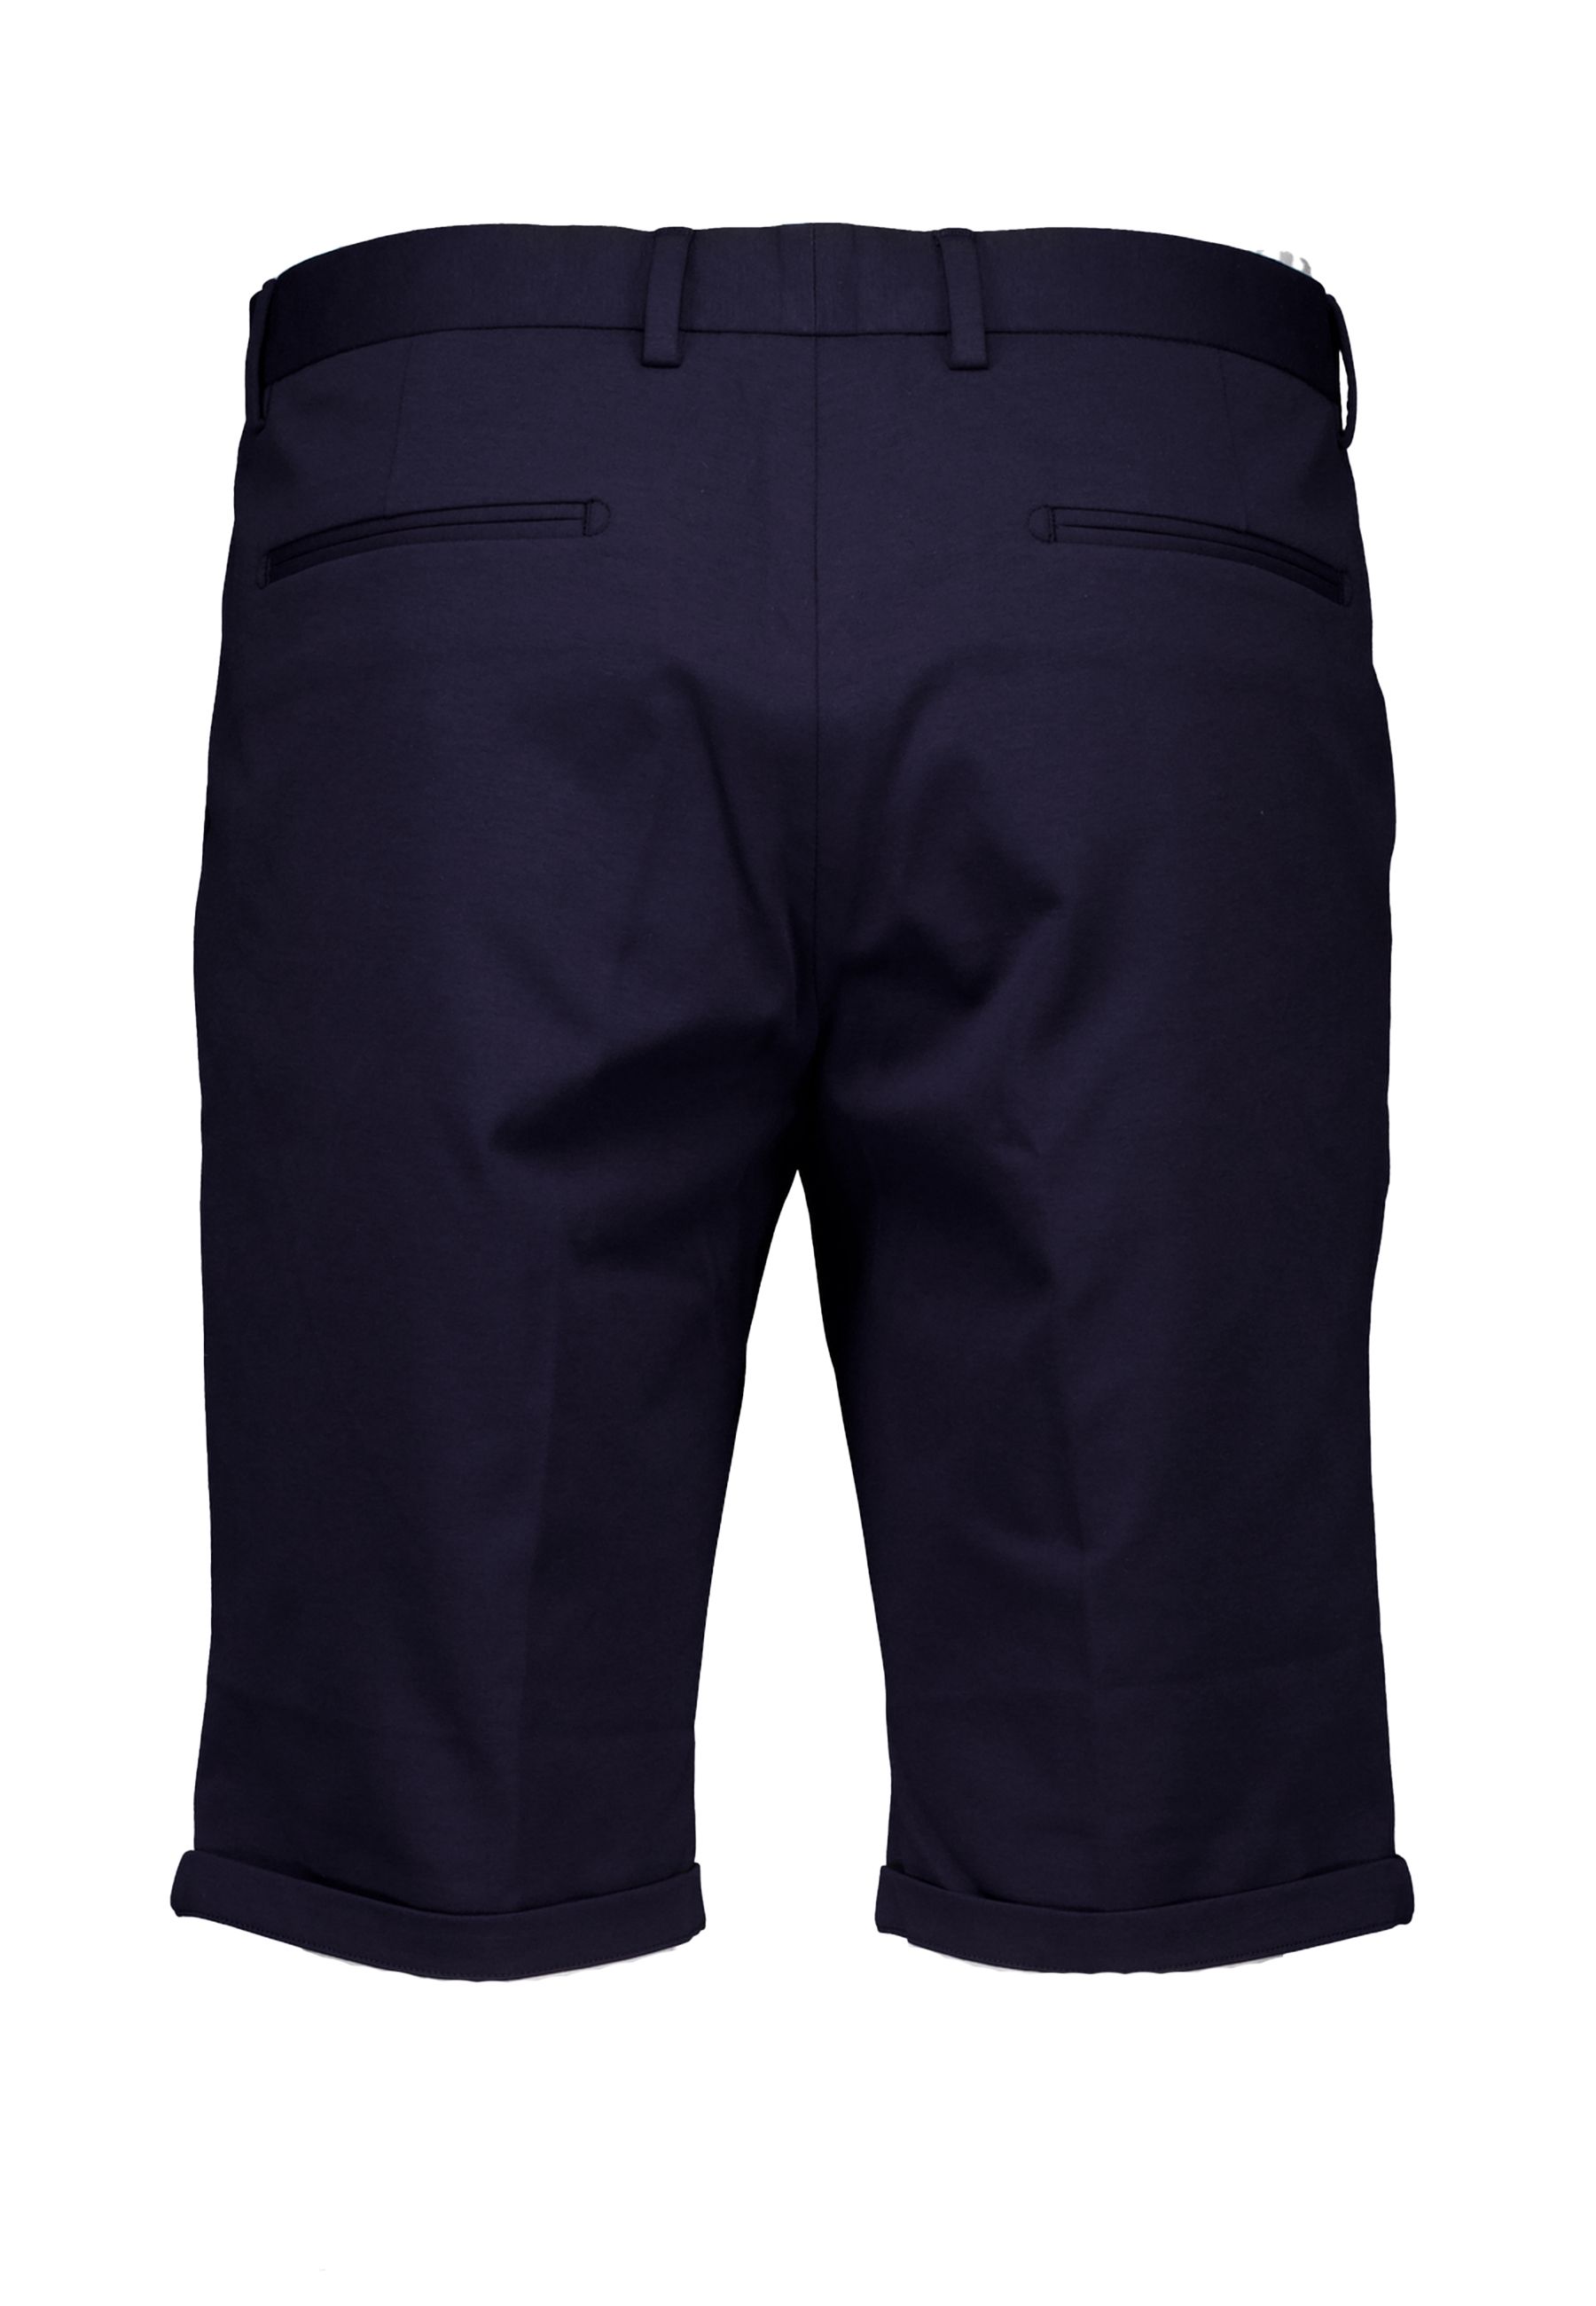 Philly Shorts Donkerblauw P9079-1967